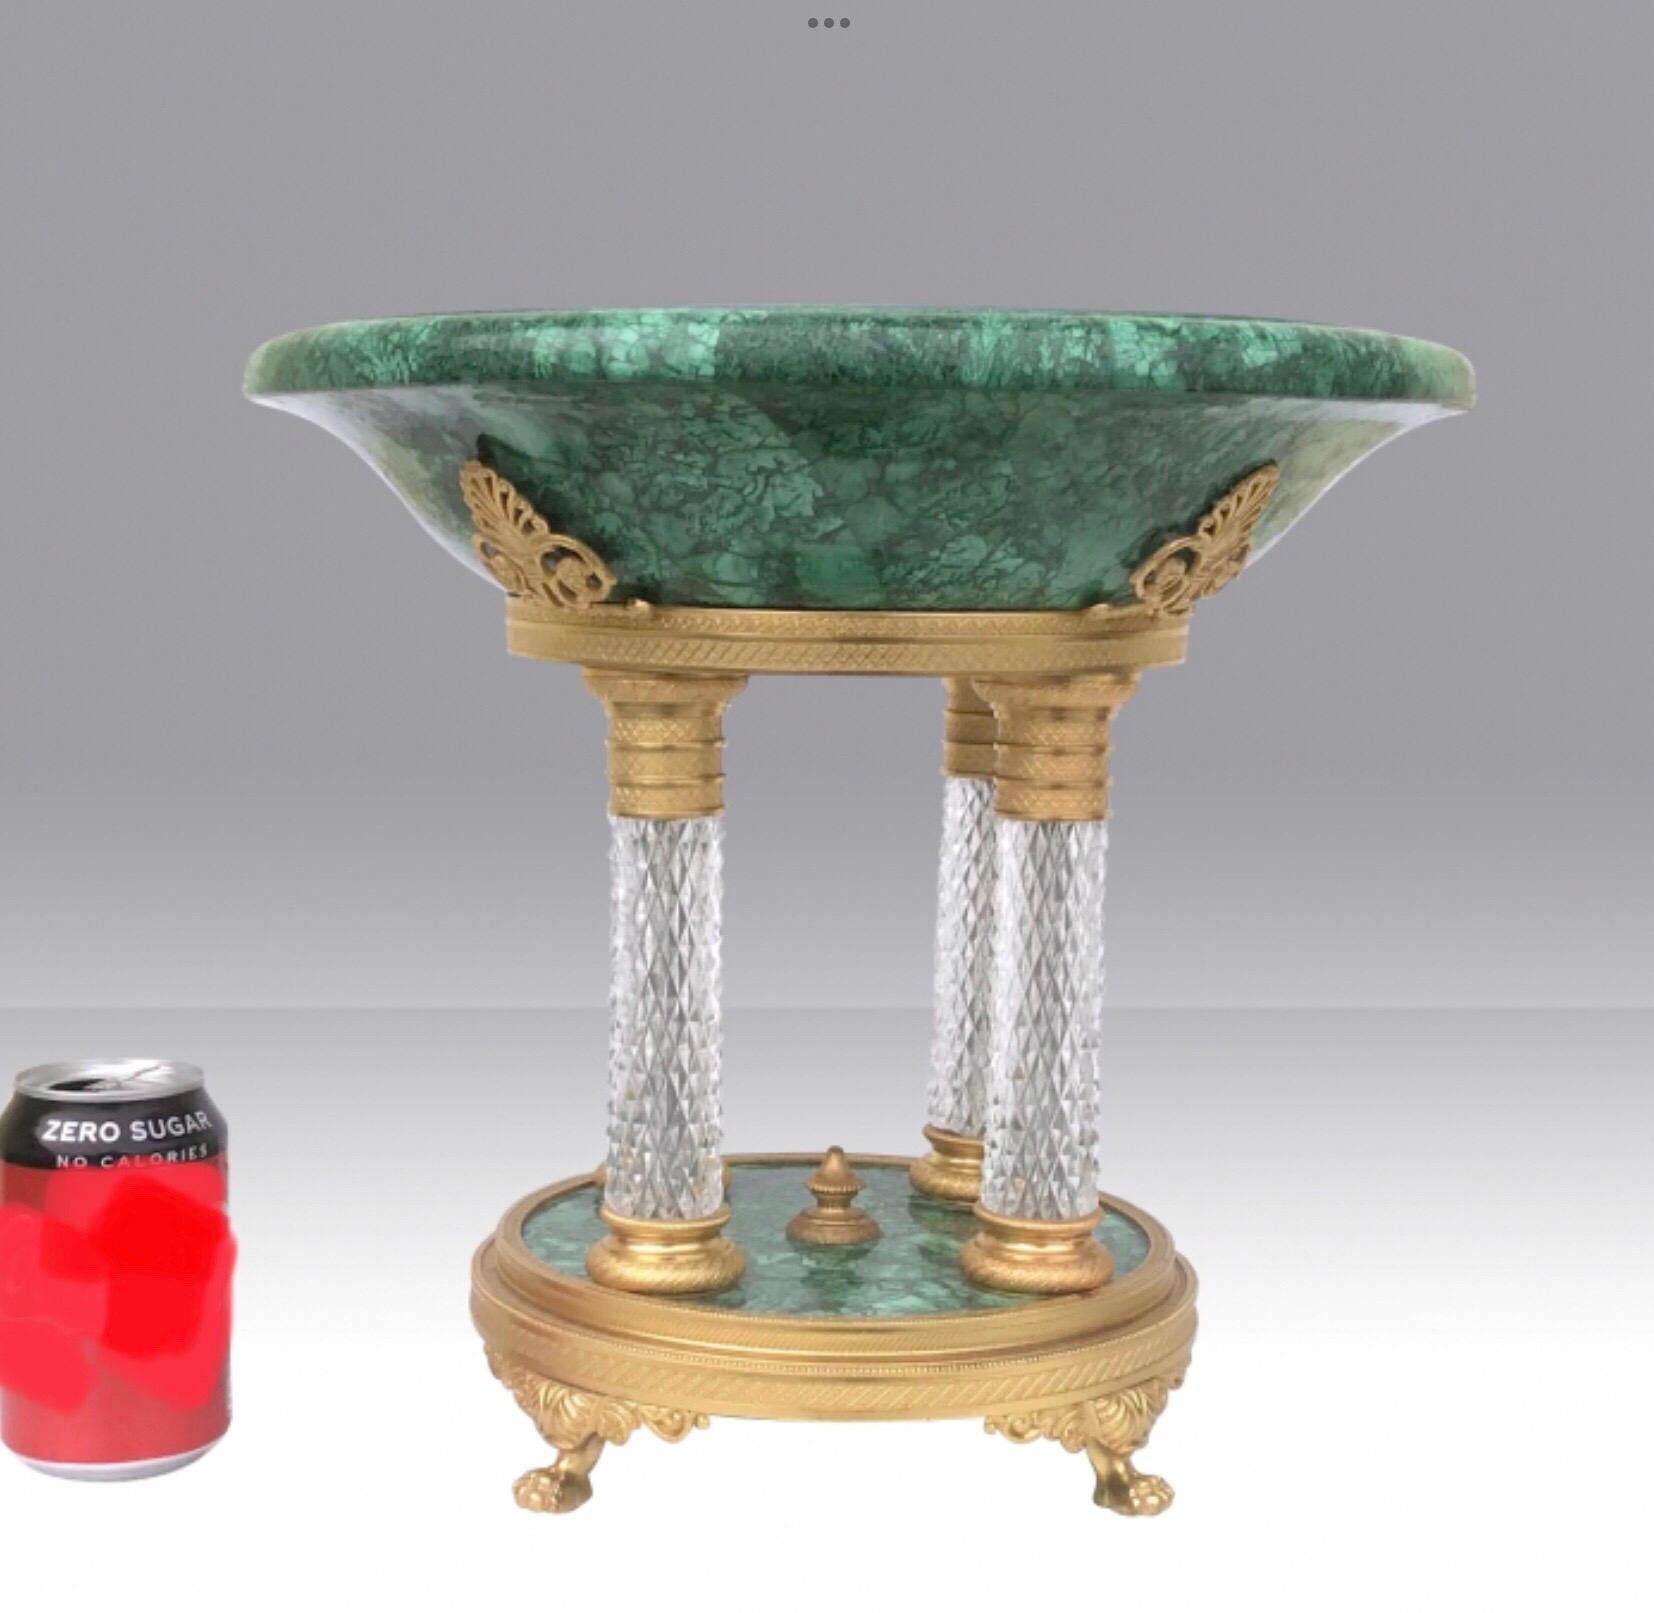 Magnificent French Malachite Tazza.
The malachite tazza is accented by four Fleur De Lit motifs composed of gilted bronze dore centered above each cut crystal pillar.
The French crystal columns are completed by a malachite base supported by four